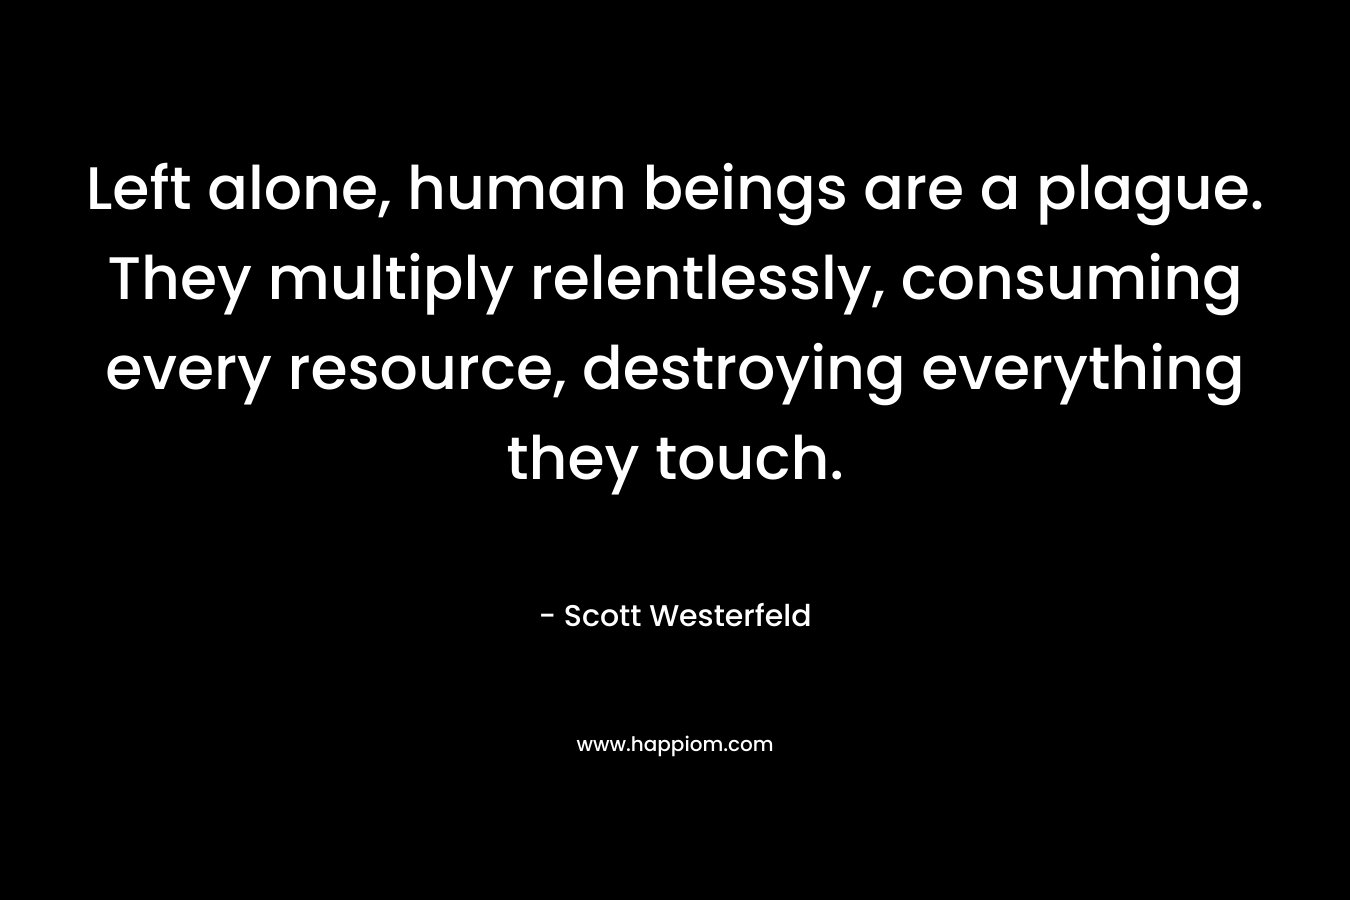 Left alone, human beings are a plague. They multiply relentlessly, consuming every resource, destroying everything they touch. – Scott Westerfeld